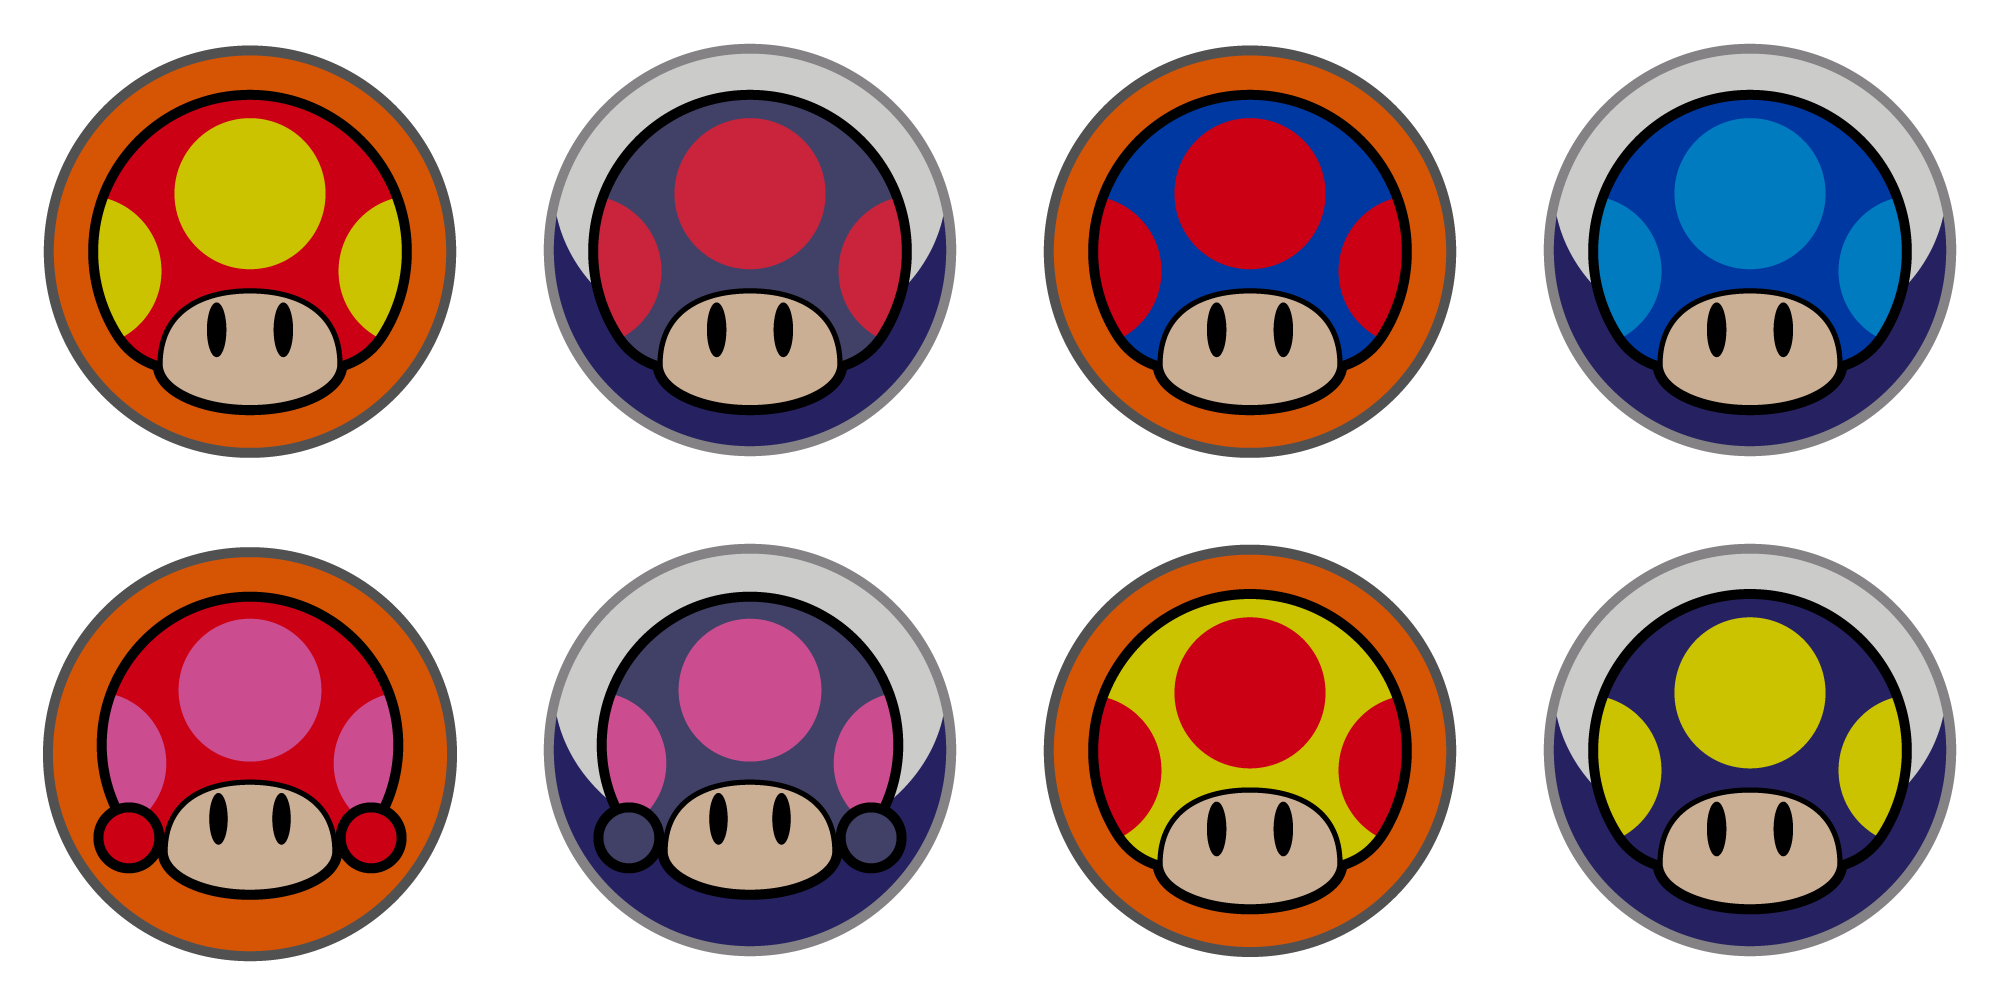 Fire-and-Penguin-Toads-emblems.png